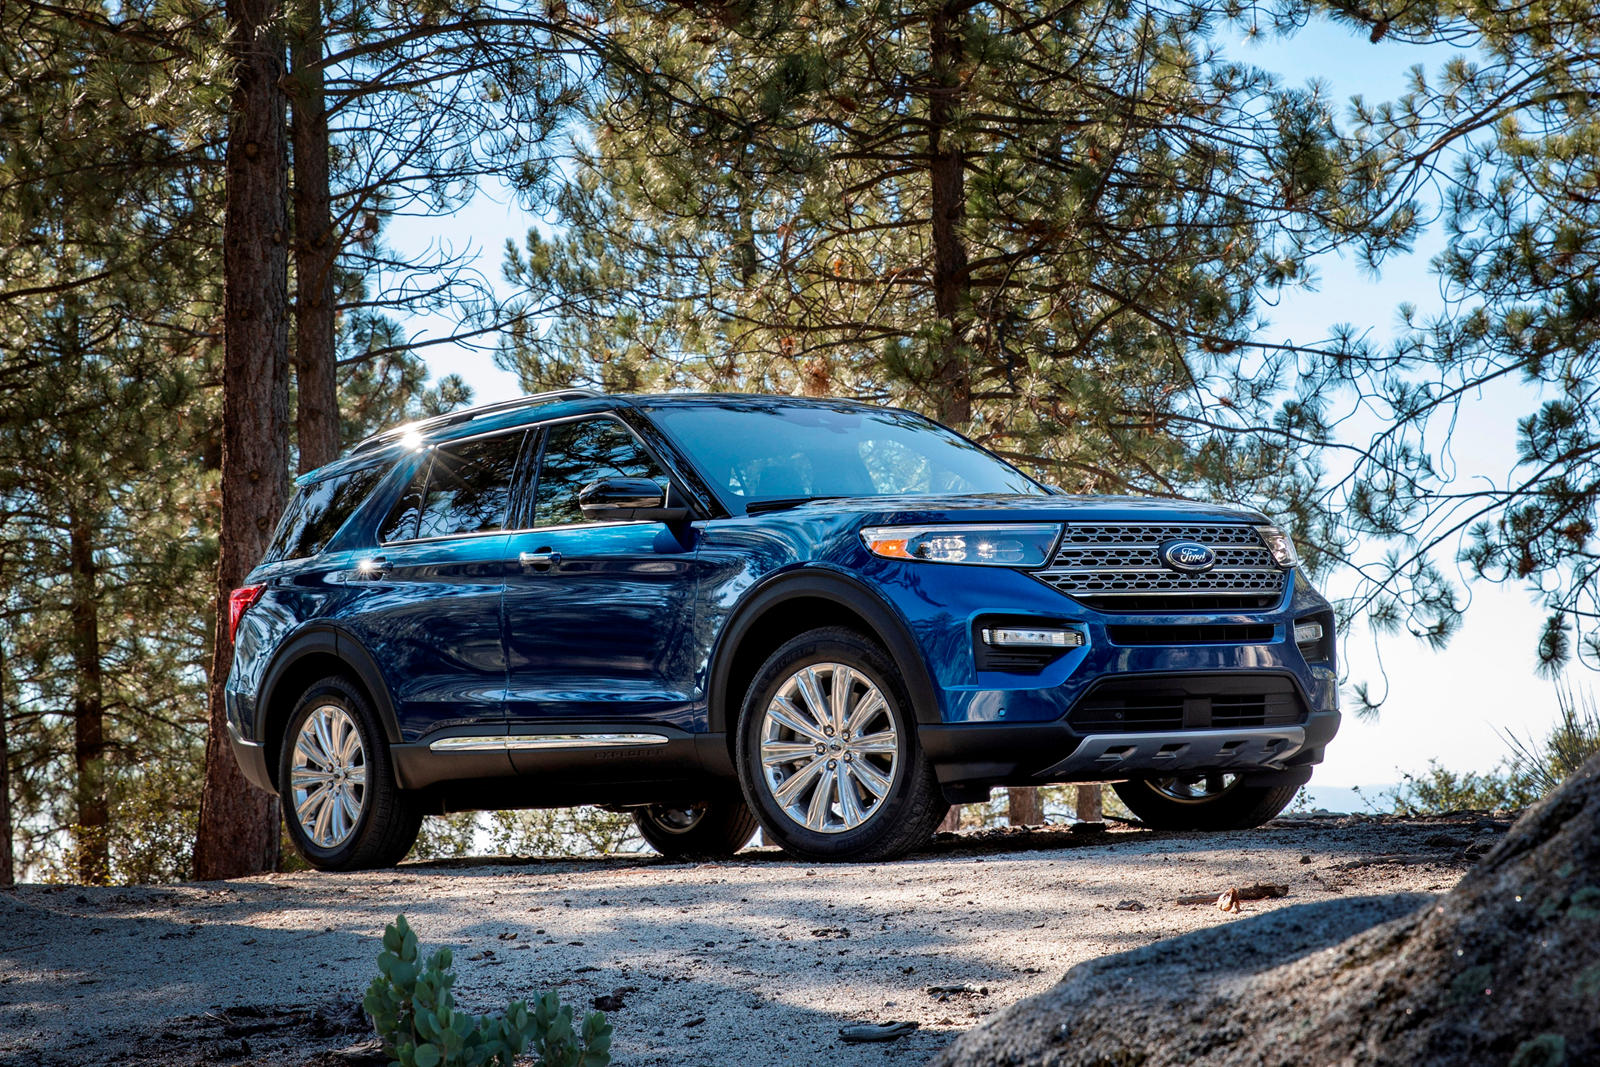 2021 Ford Explorer Review | New Ford Explorer SUV - Price, MPG, Towing